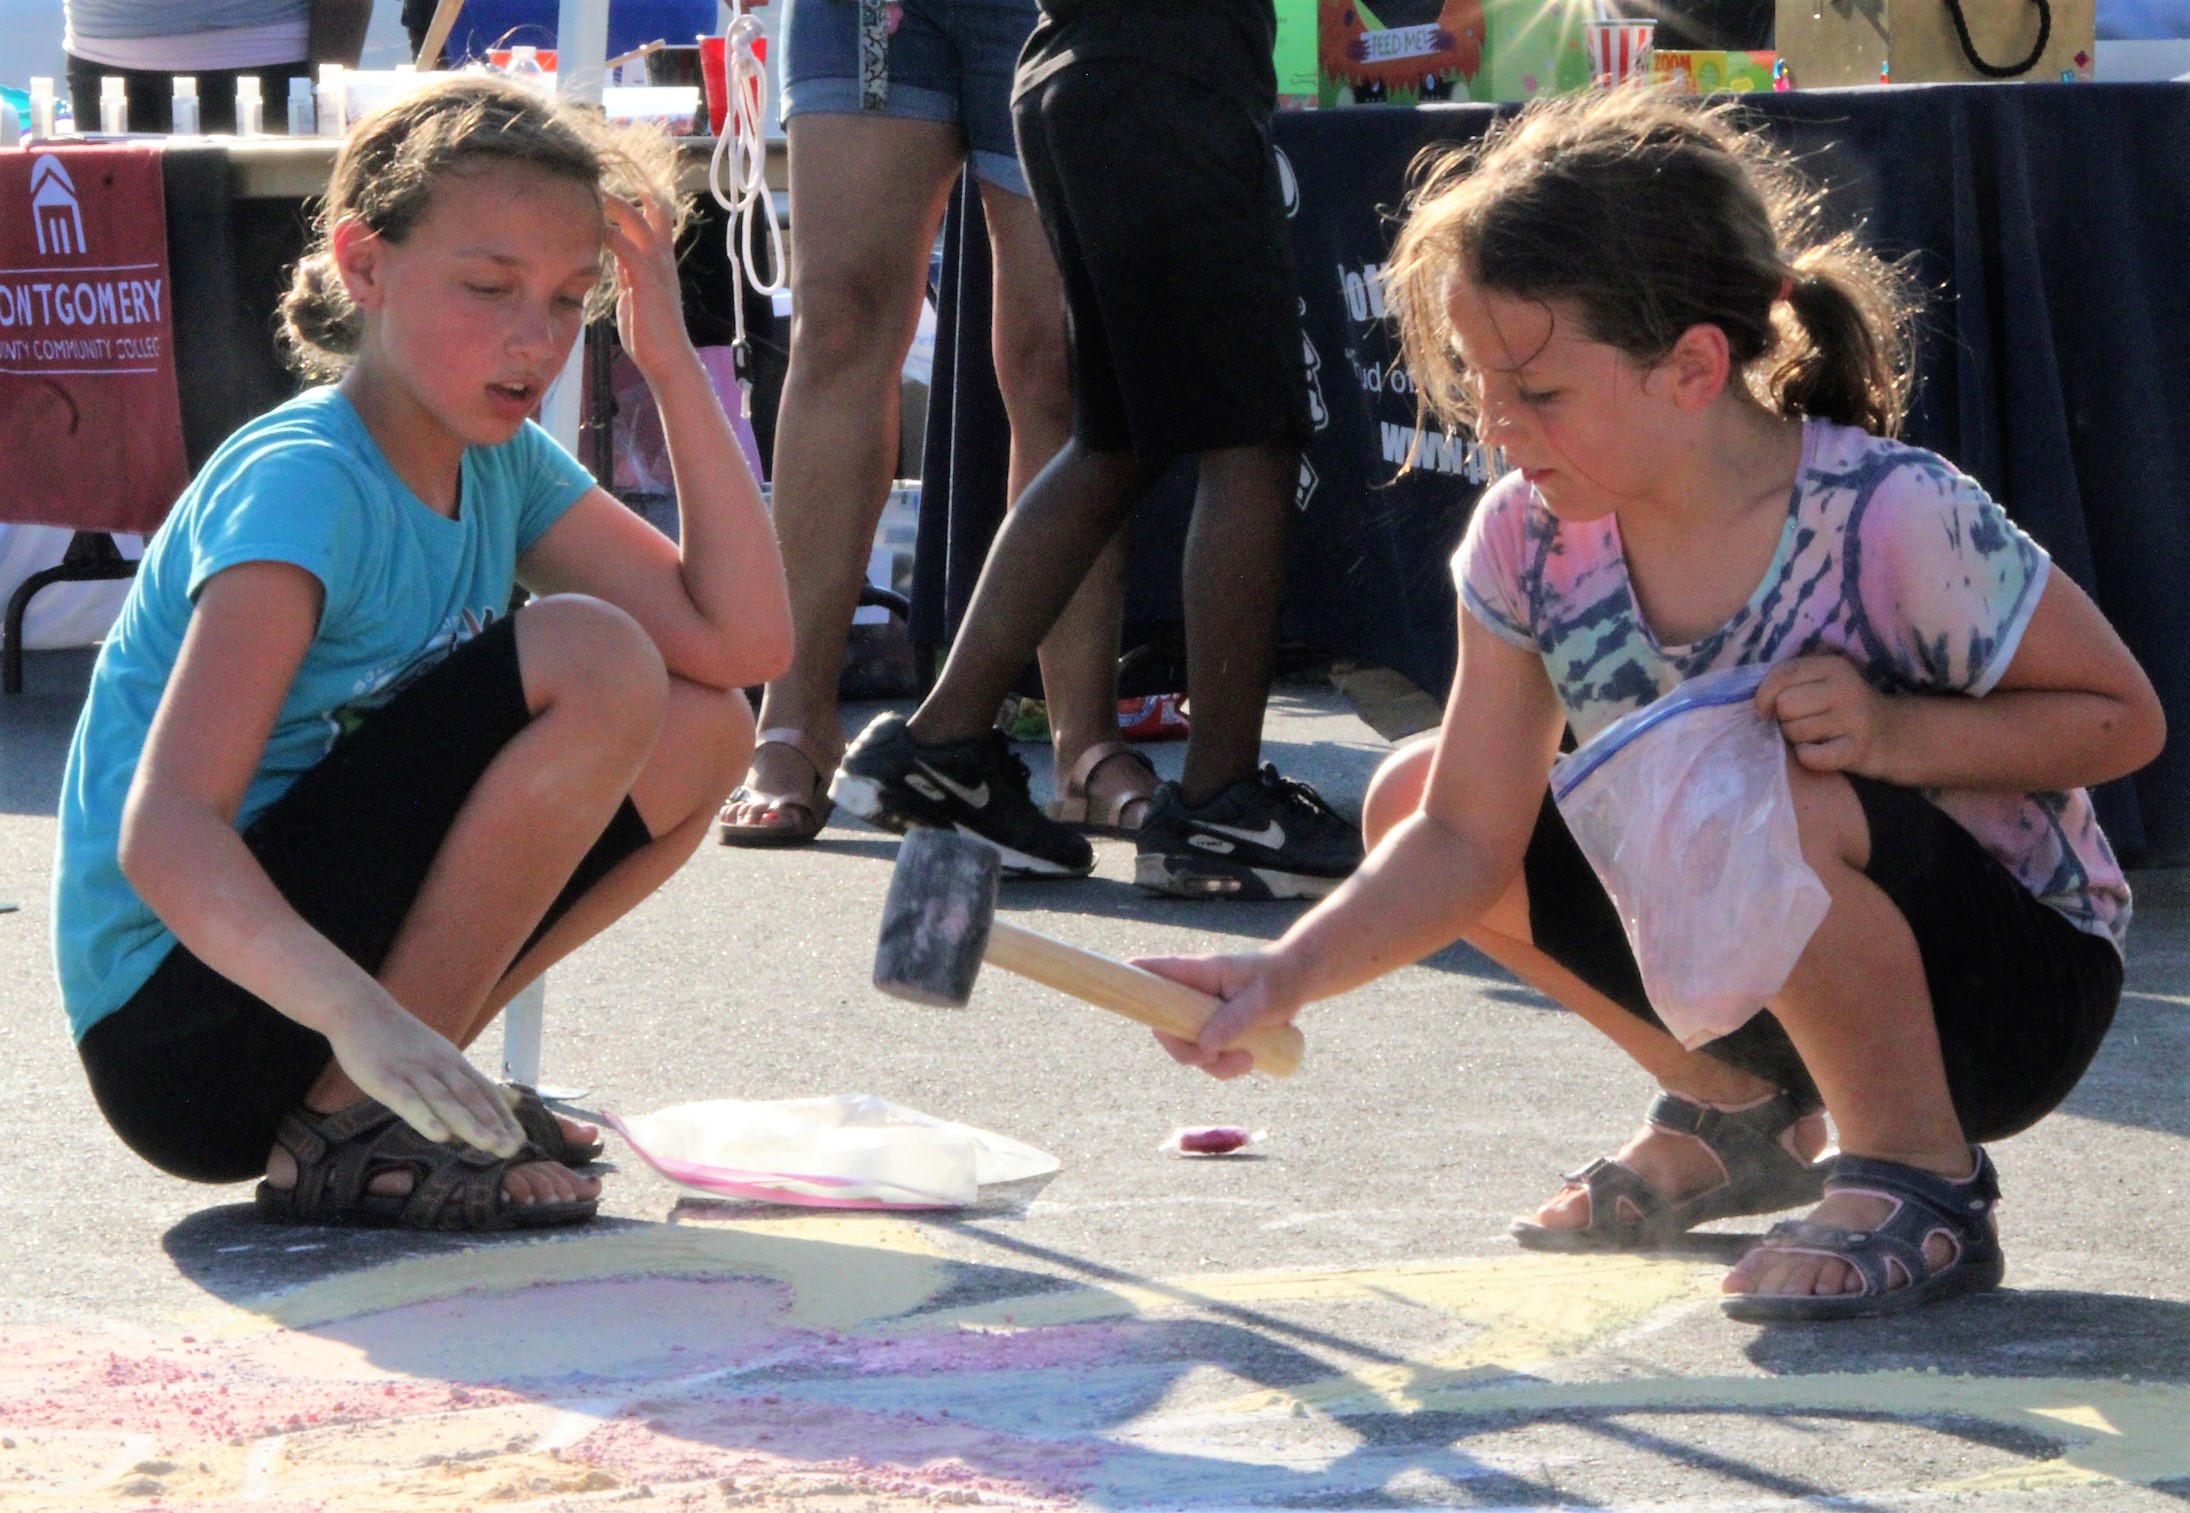 On 'Play Streets', Conversation, Laughter, and Safety